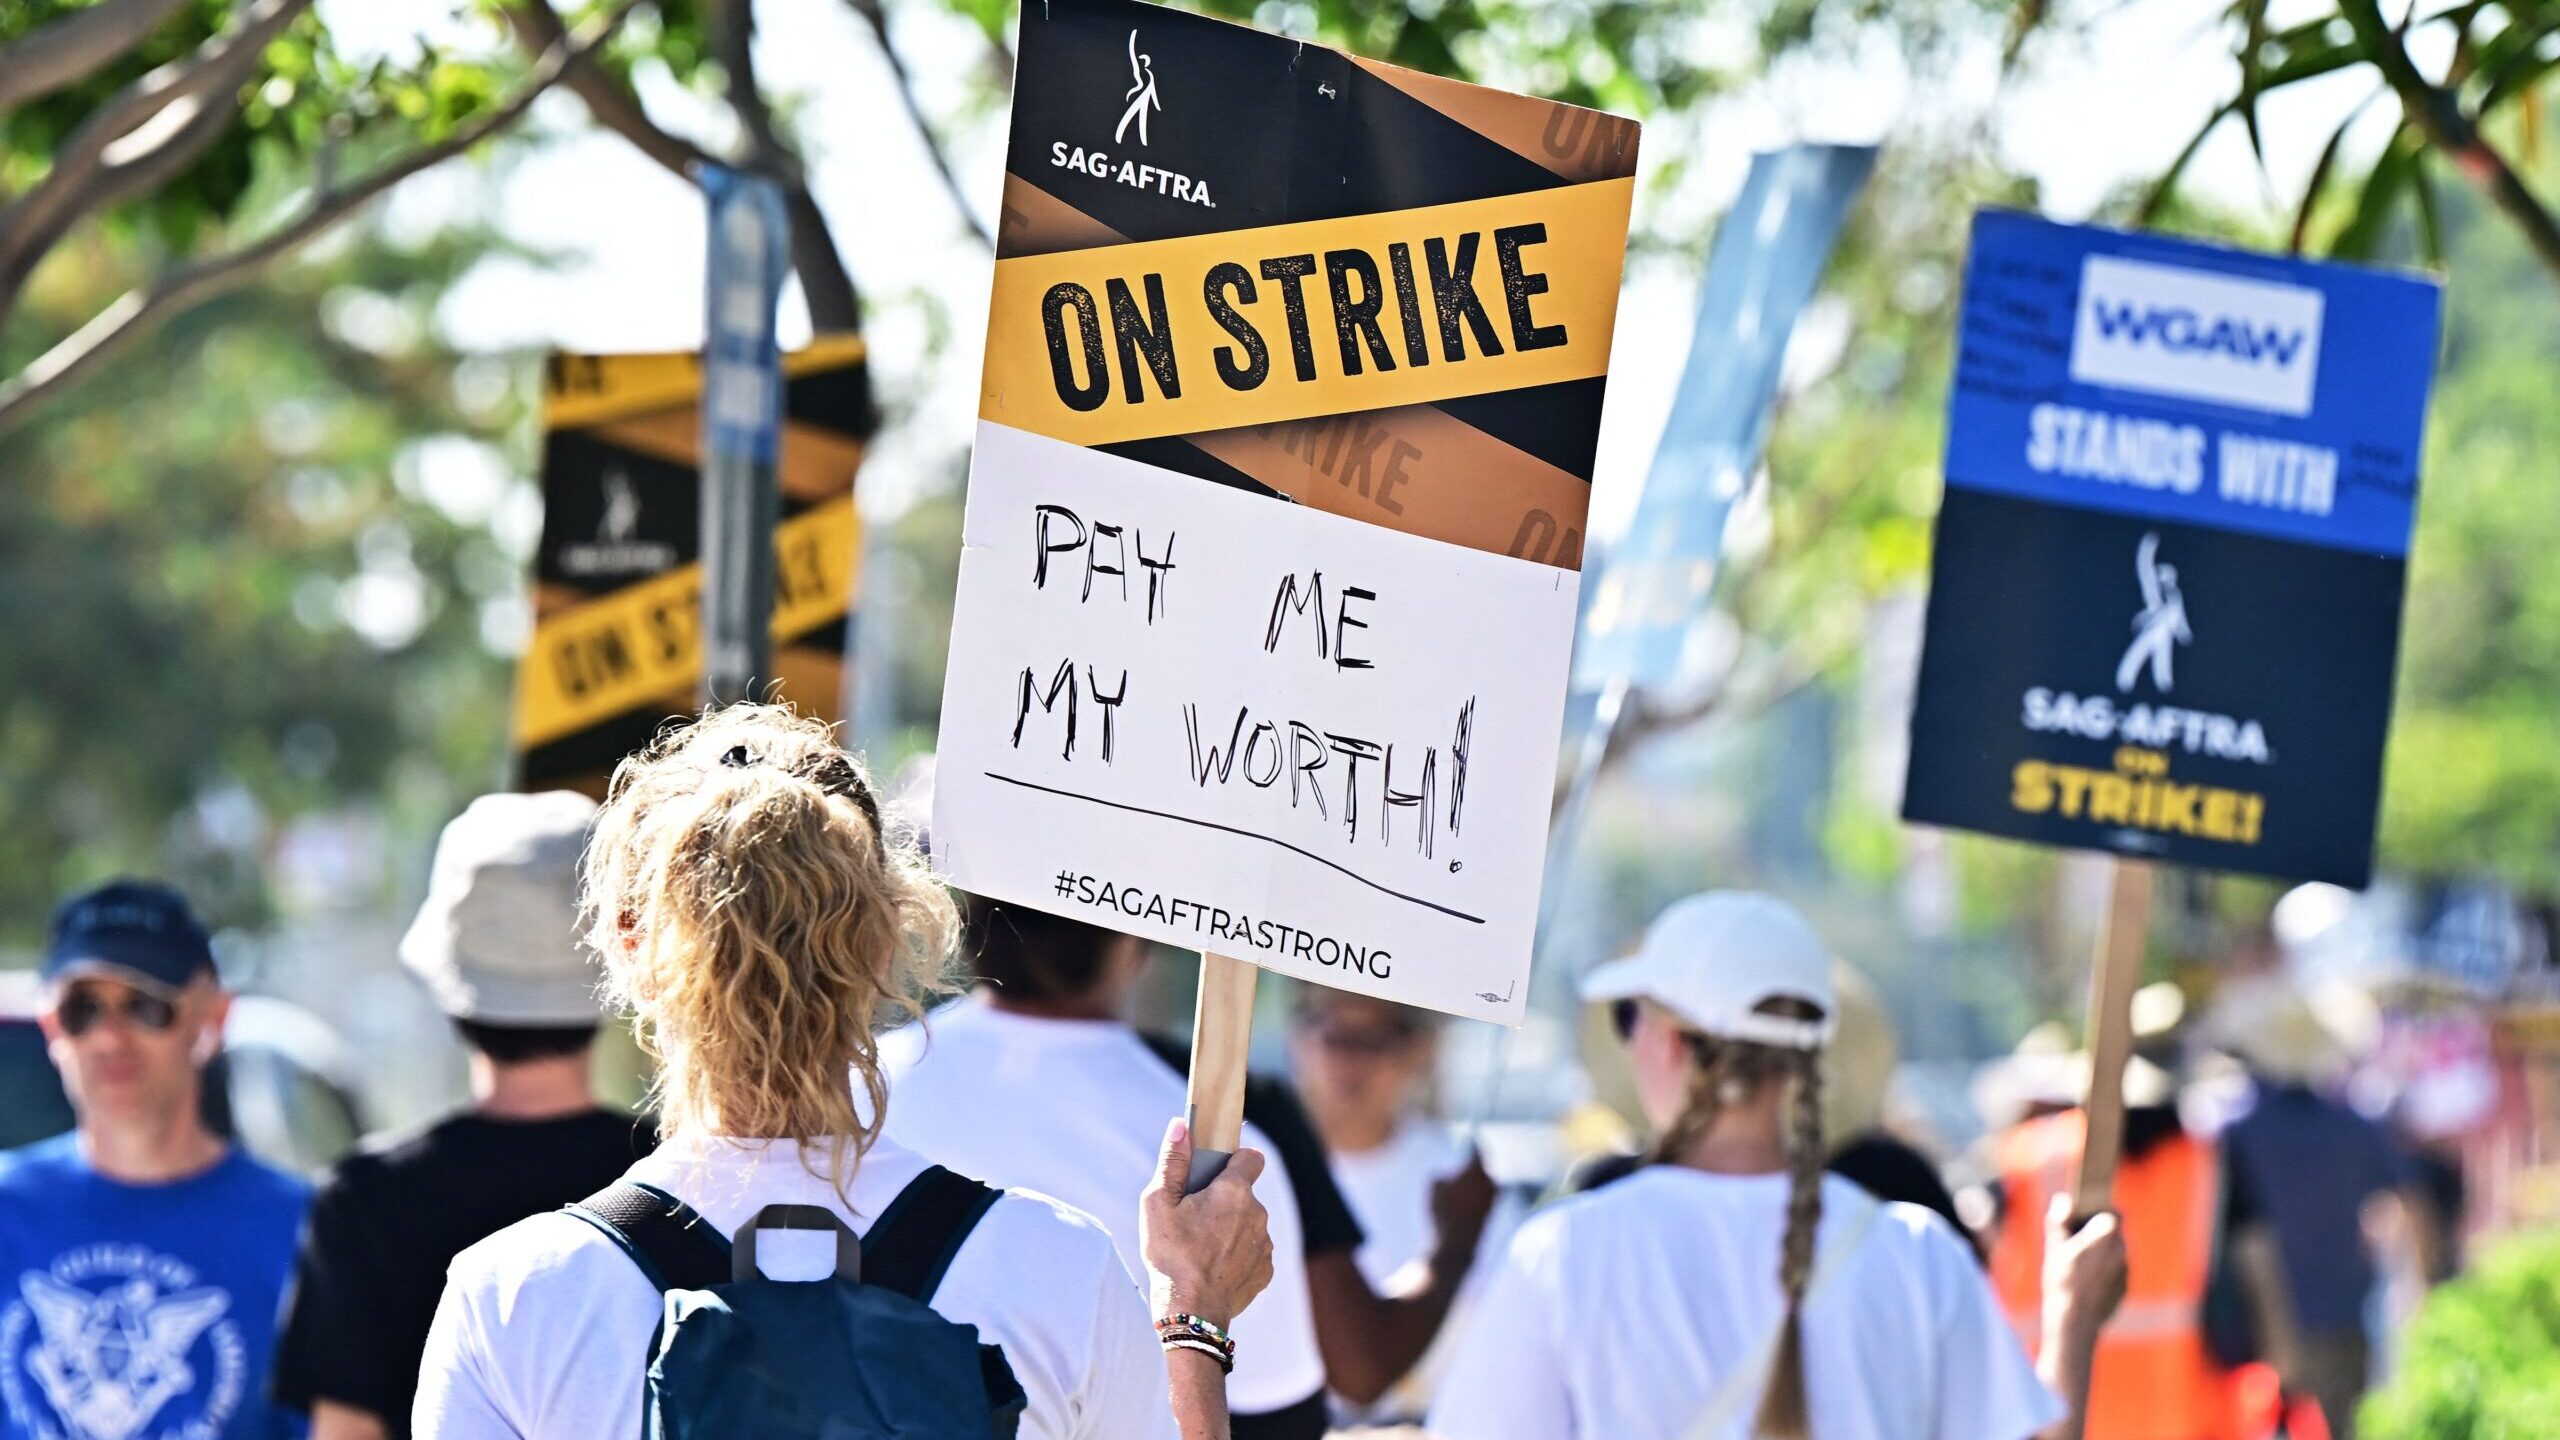 SAG-AFTRA members picket outside of Netflix's building on day 99 of their strike against the Hollyw...